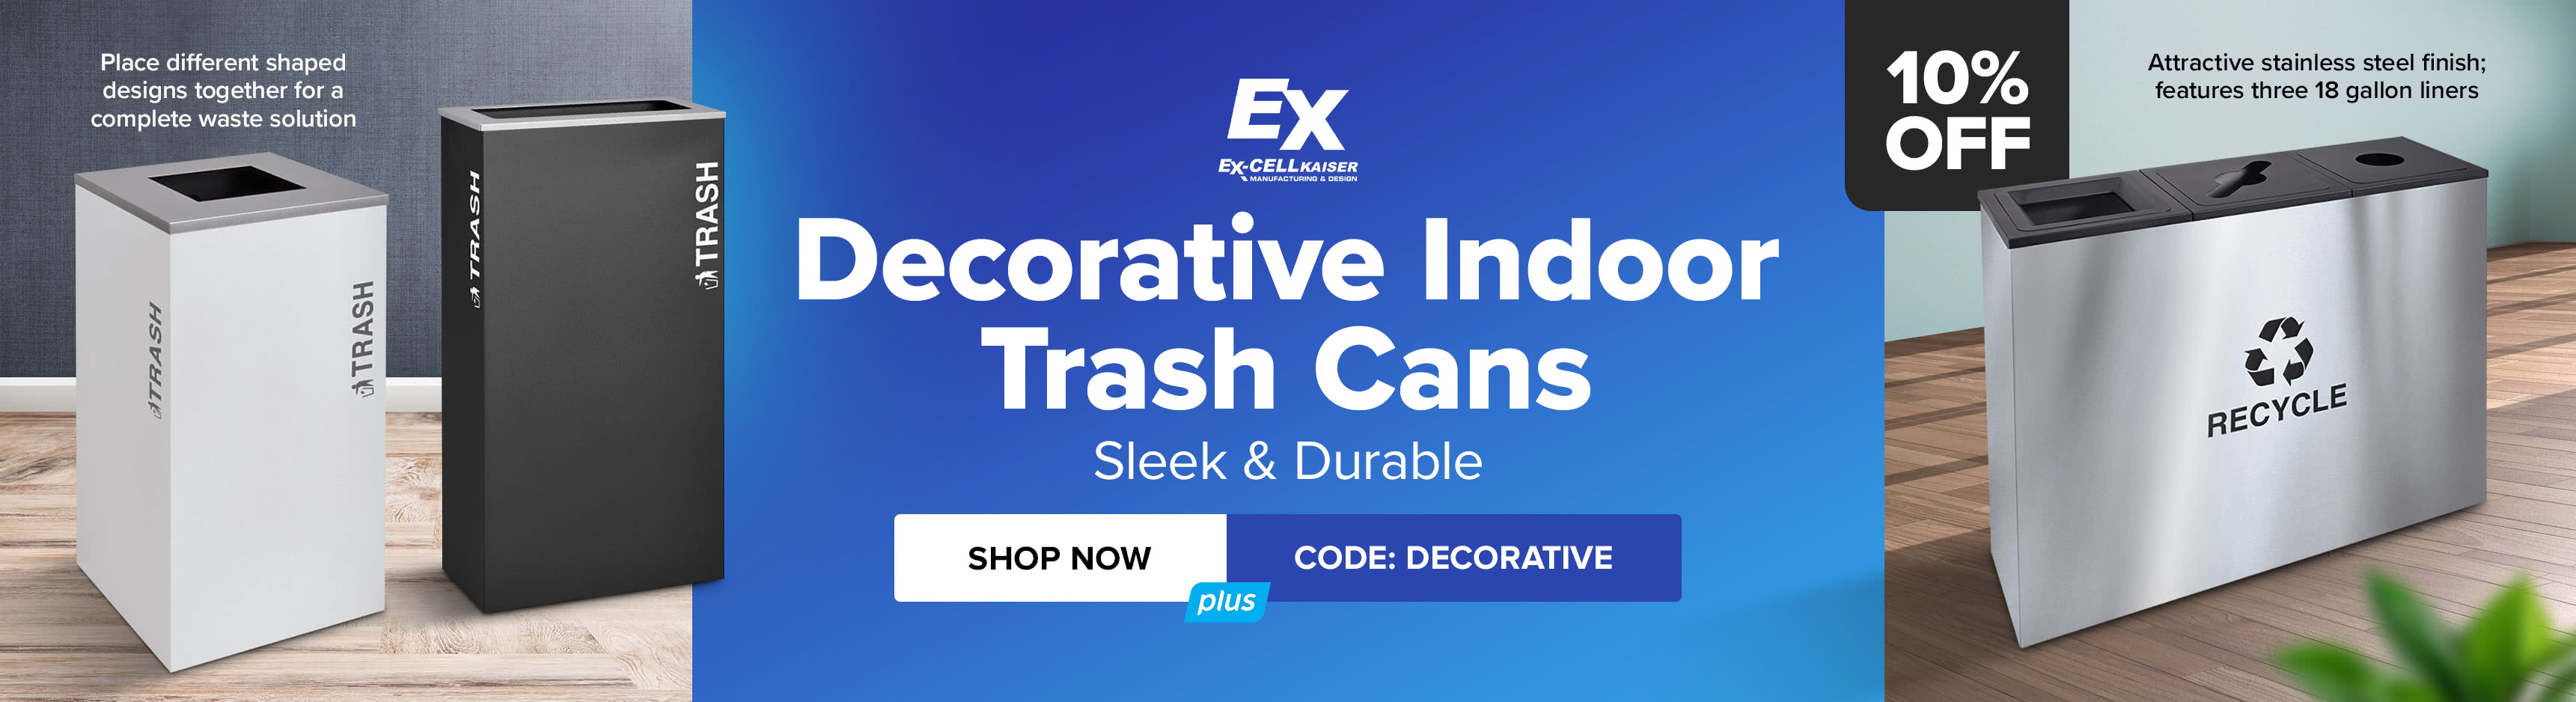 Ex-Cell Kaiser Decorative Indoor Trash Cans - Sleek and Durable. Don’t Miss These 10% Off Savings.